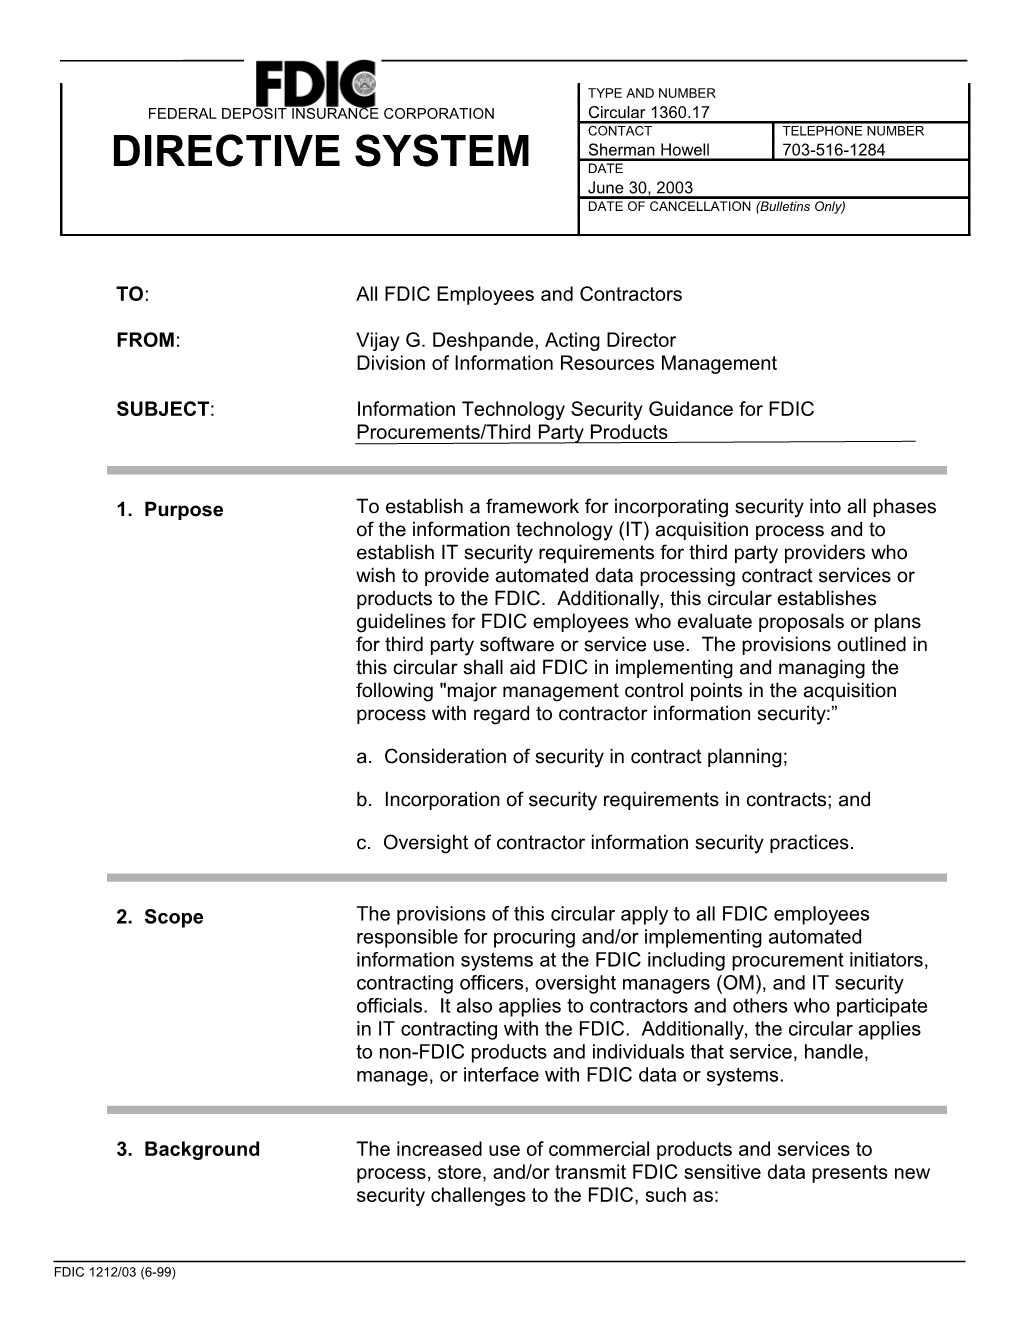 Circular 1360.17, Information Technology Security Guidance for FDIC Procurements/Third